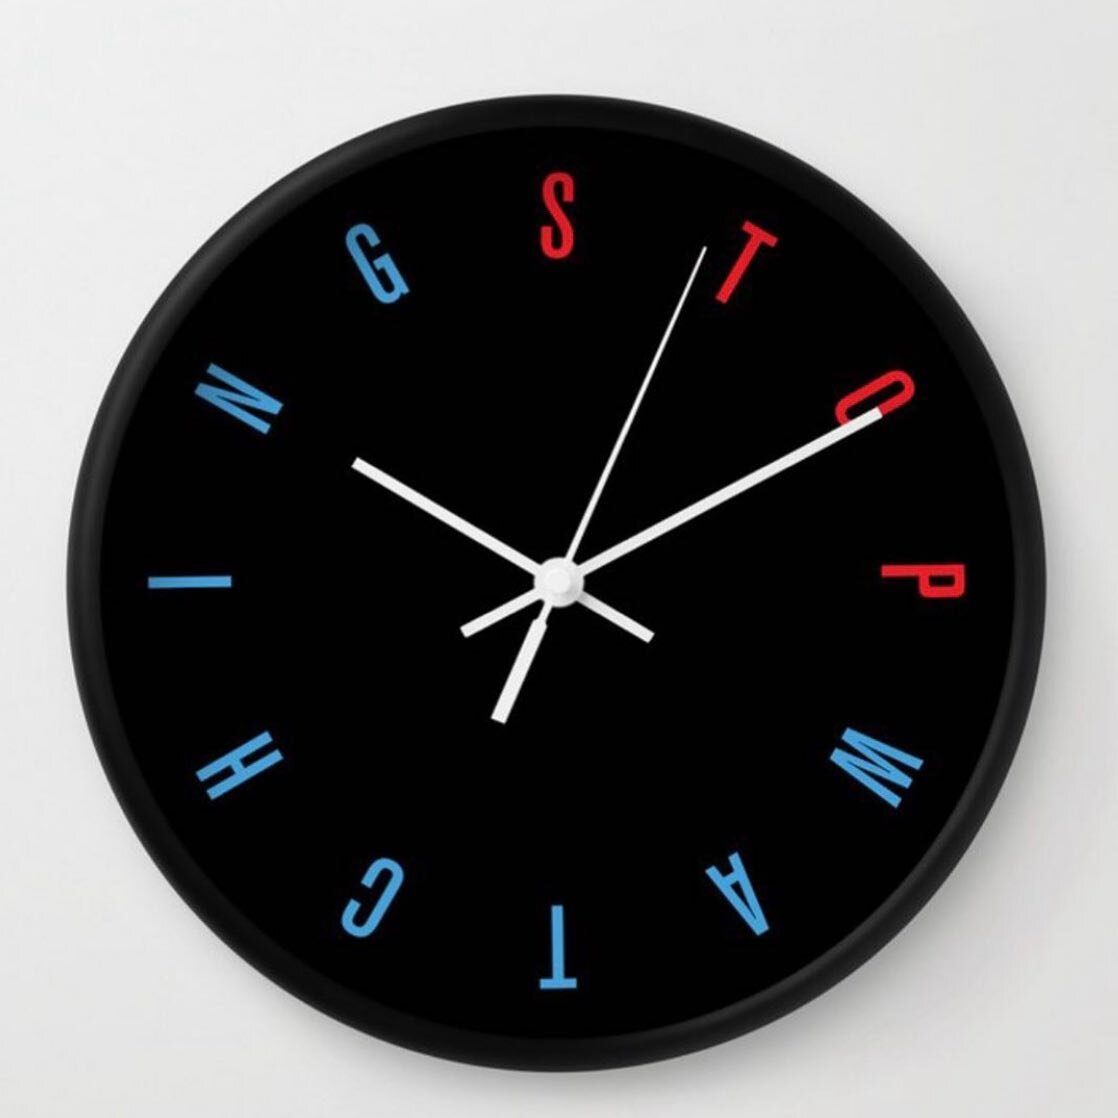 This is one of my favorites and a best seller. I&rsquo;m considering making and distributing my own high-quality version of this. Was going to use black on black embossed type. Does anyone have ideas about what I should do?
#clocks #timepiece #homede